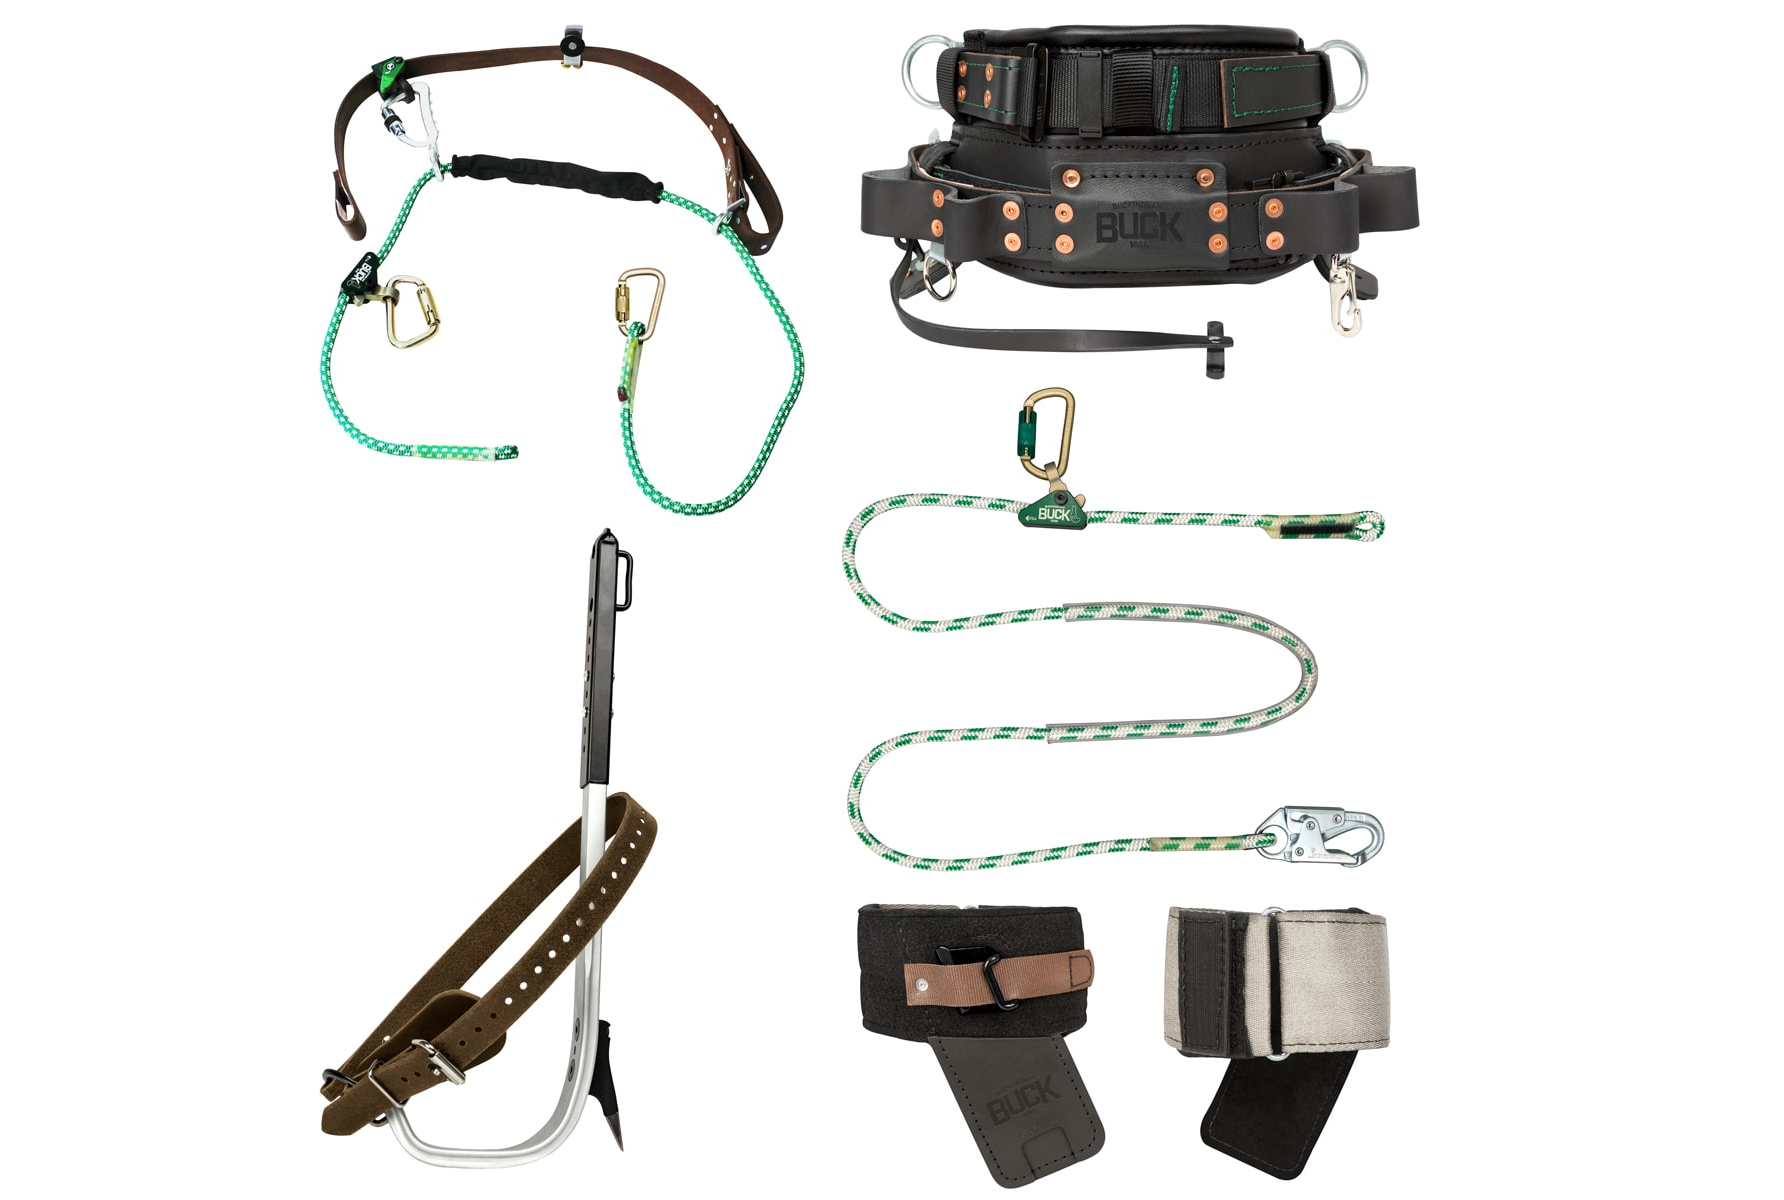 What Climbing Gear and Safety Equipment Does a Lineman Need?